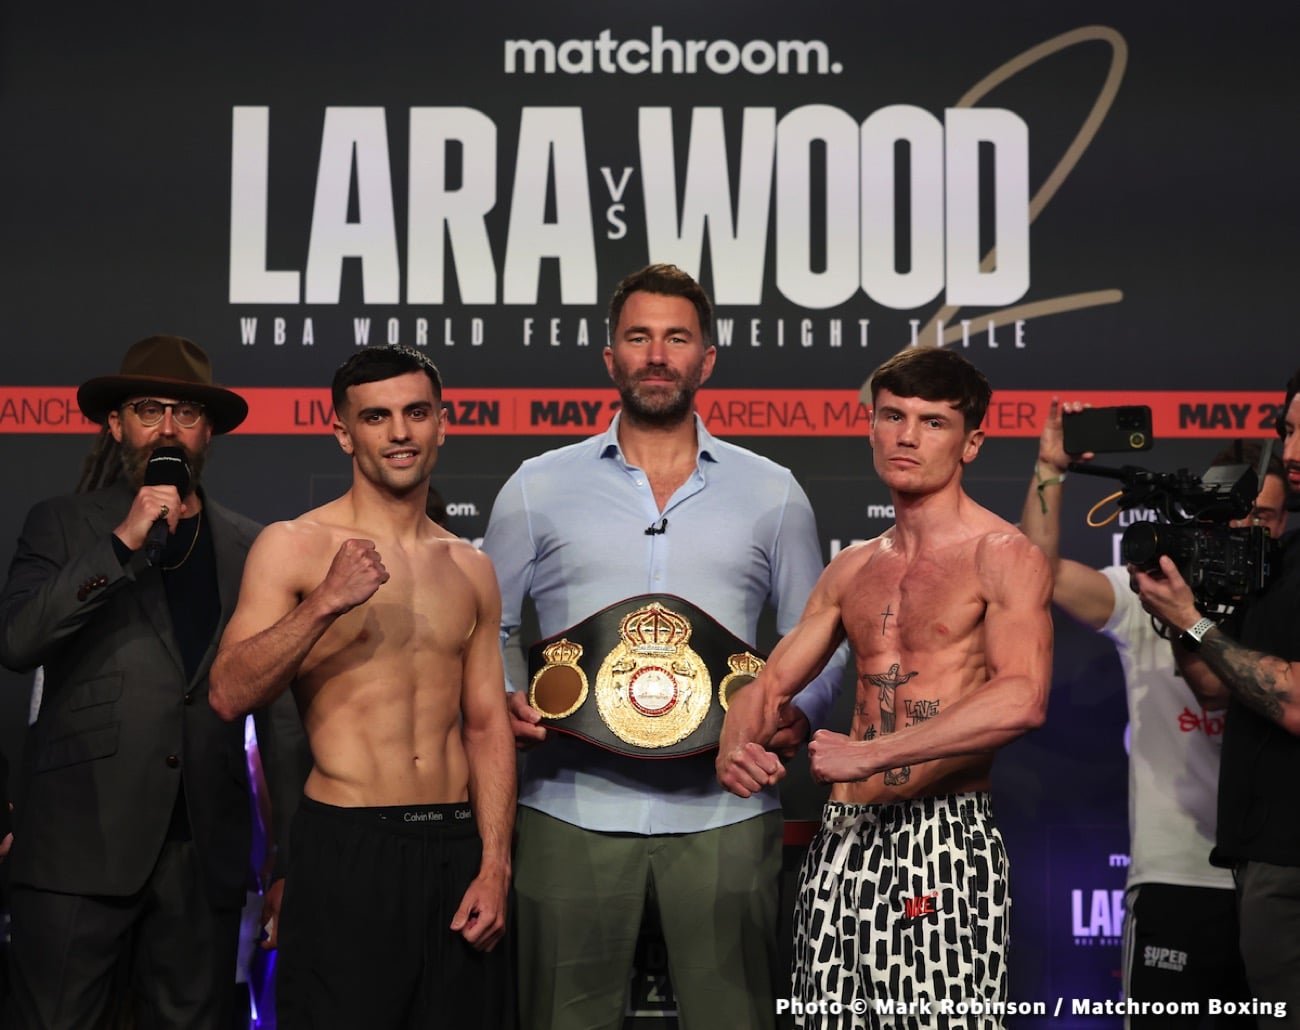 Mauricio Lara - Leigh Wood's rematch in jeopardy as Lara fails to make weight (and has no chance)